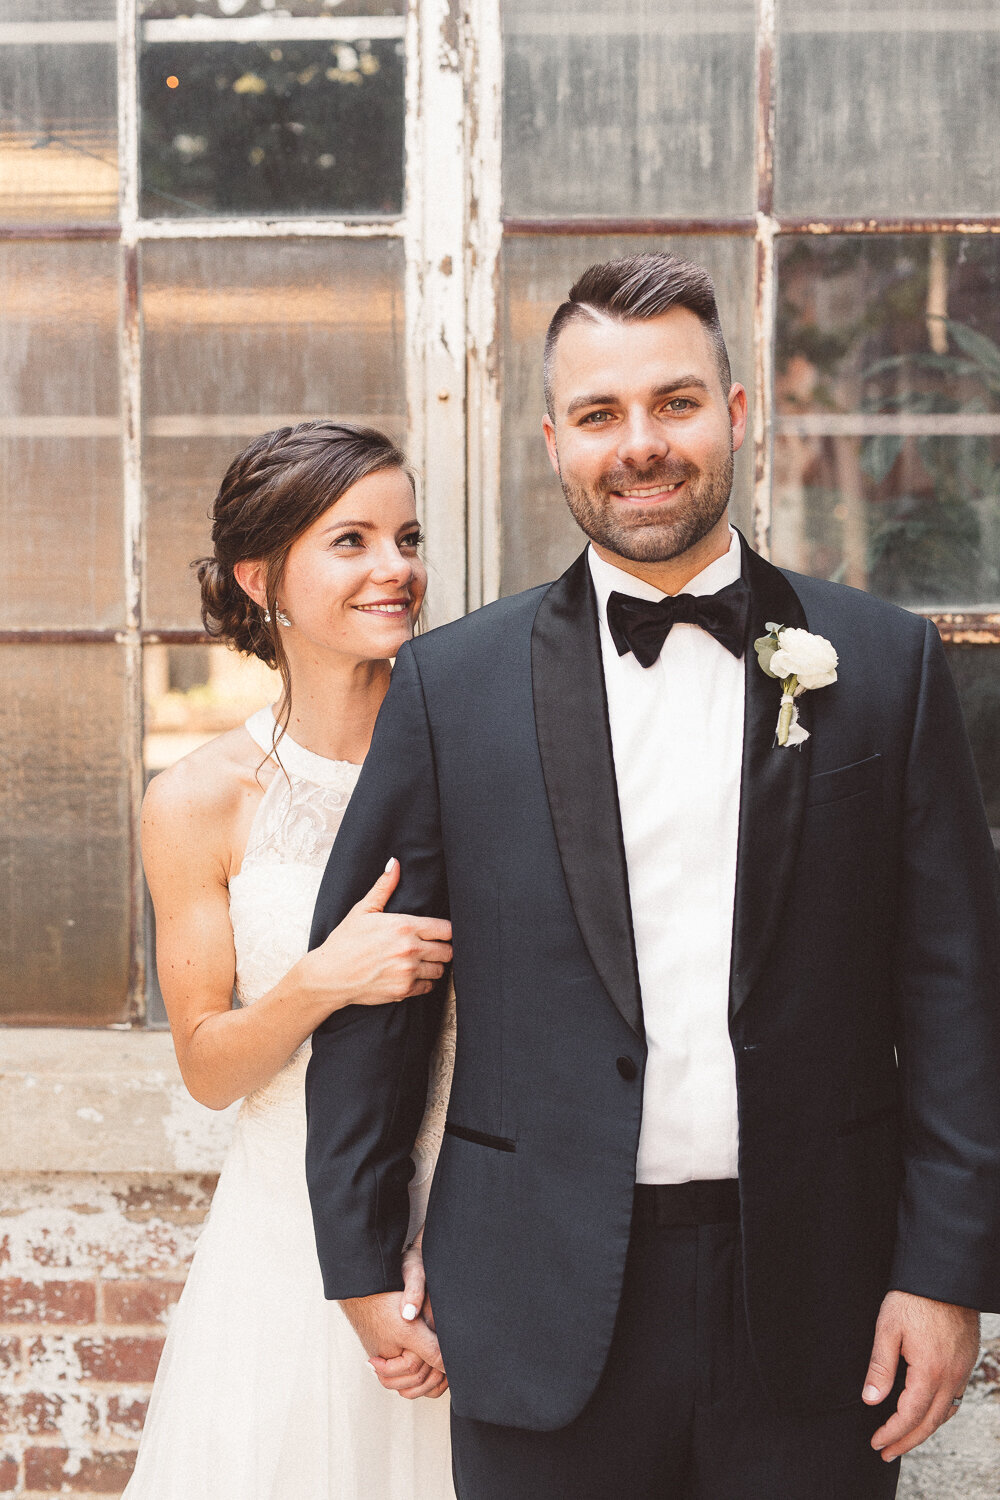 Kenzie and Nick' Wedding featuring a custom Renee Grace Bridal gown